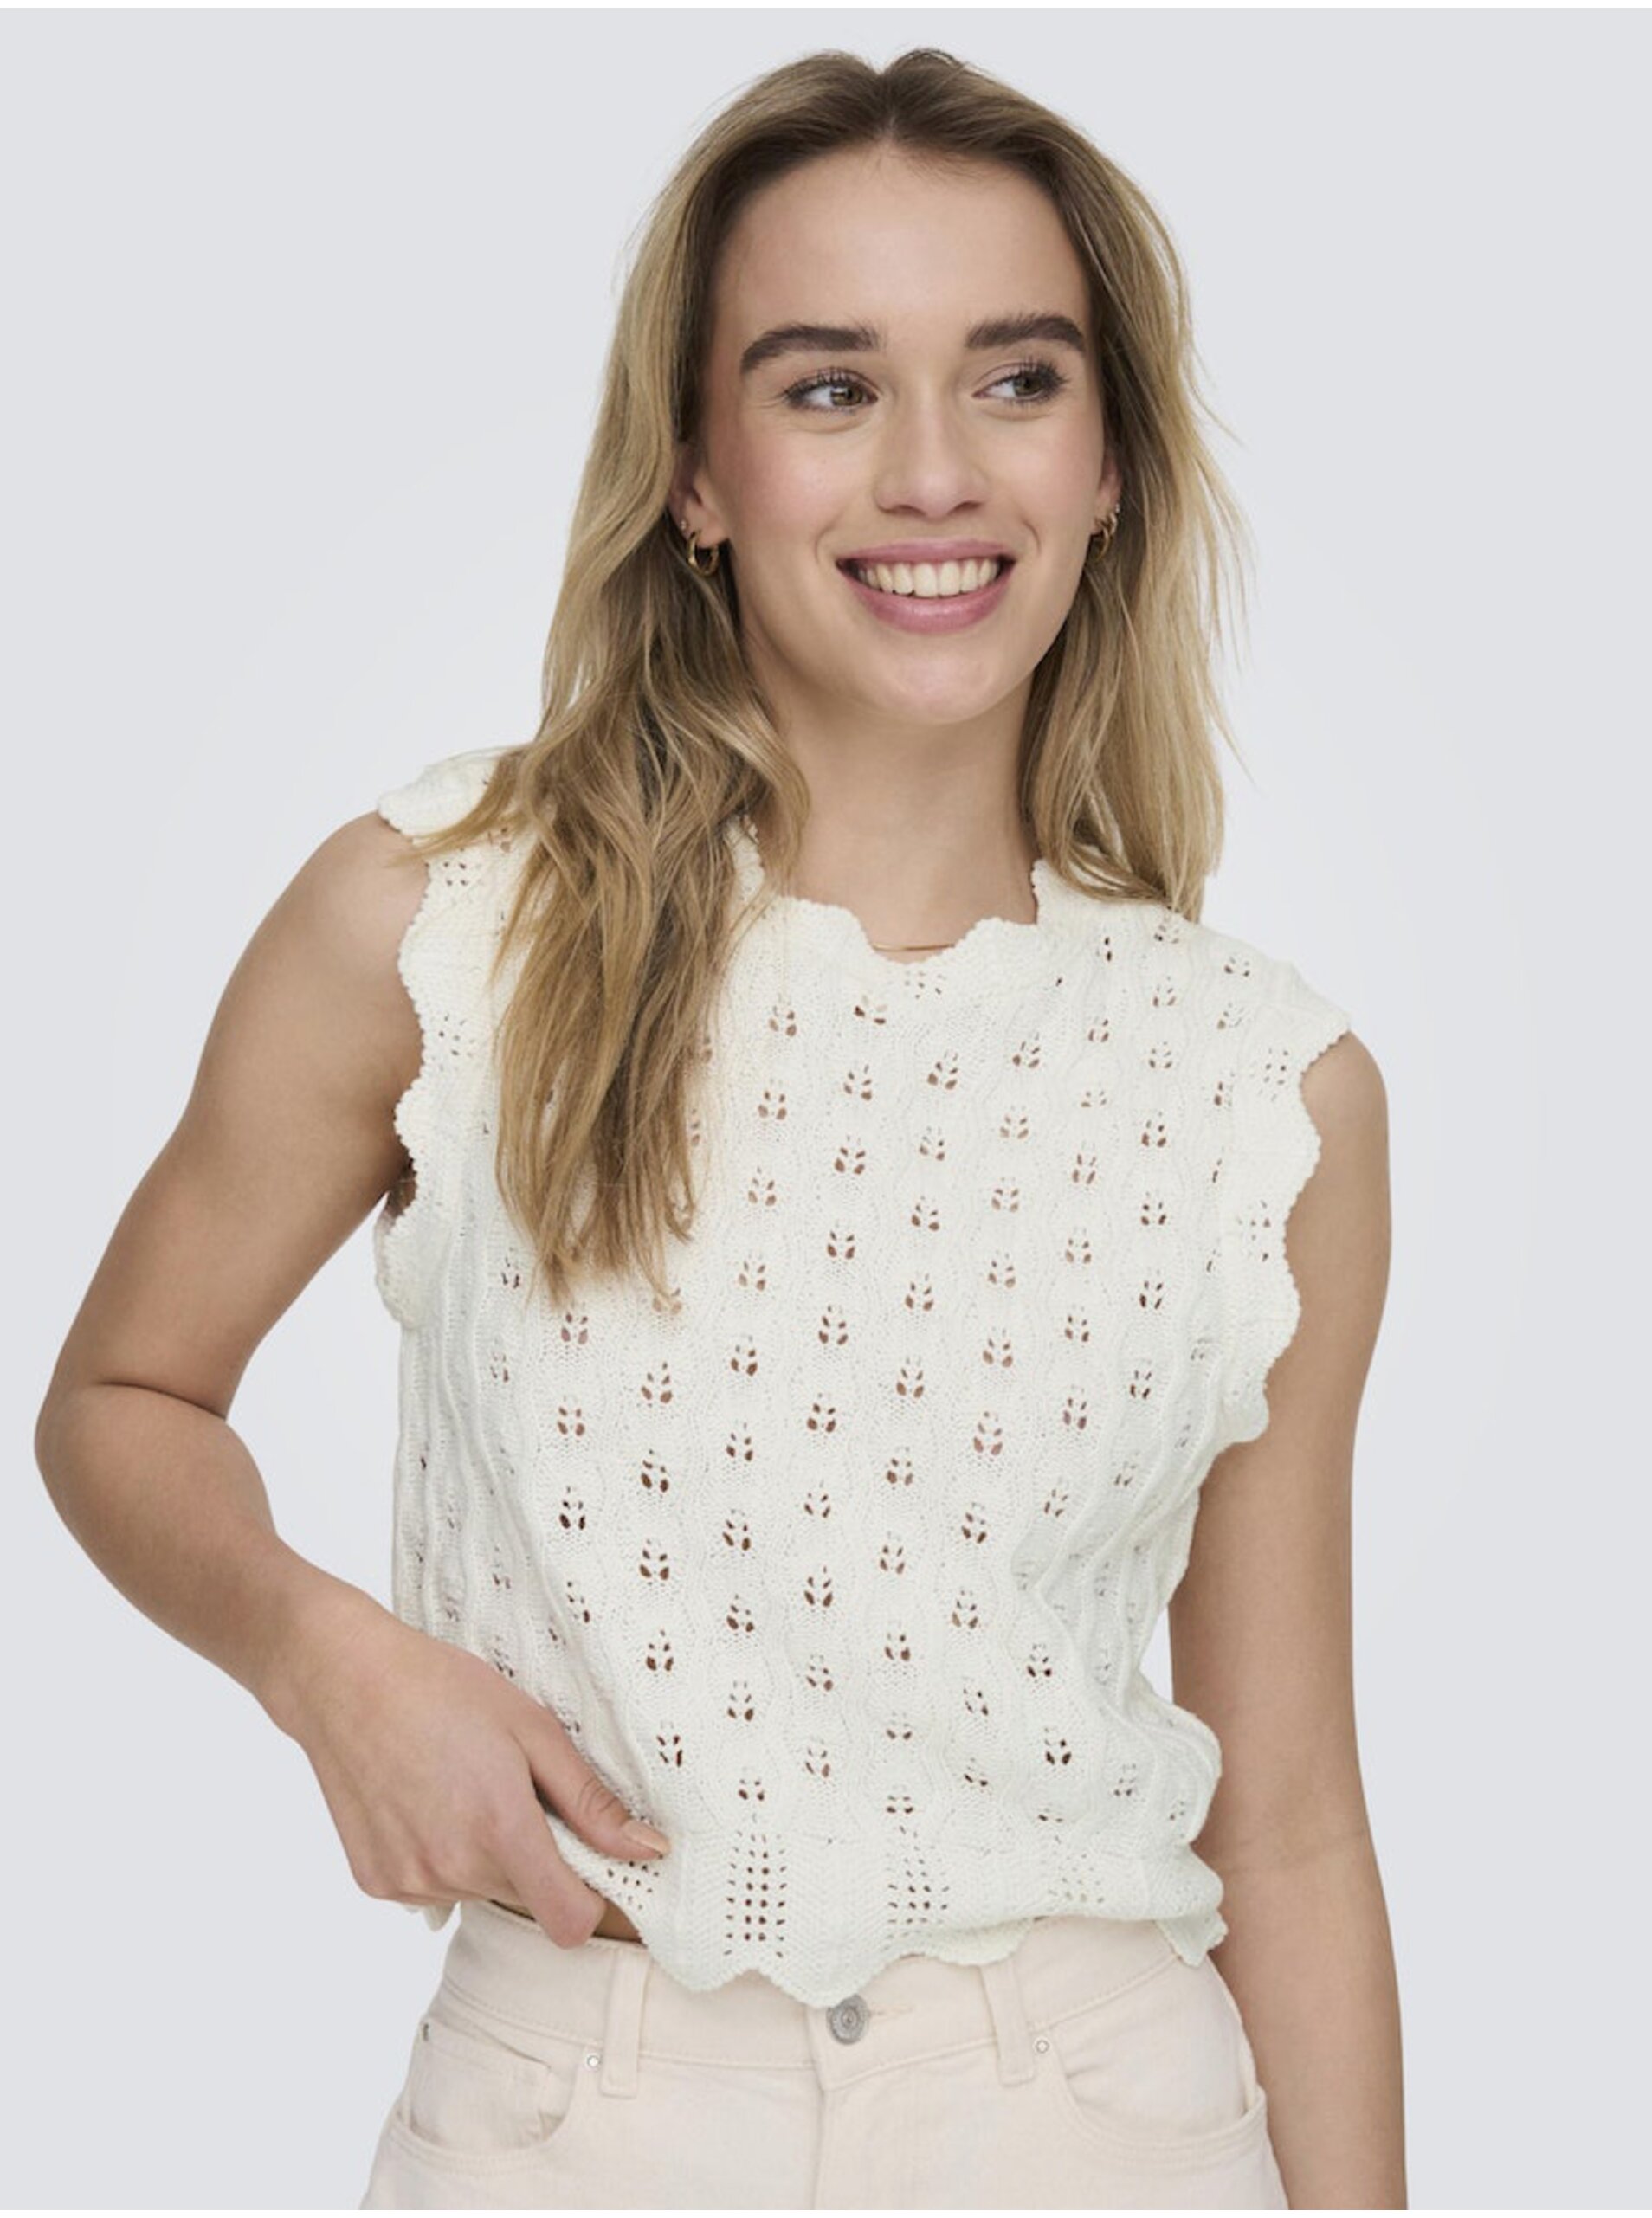 Women's cream perforated top ONLY Luna - Women's